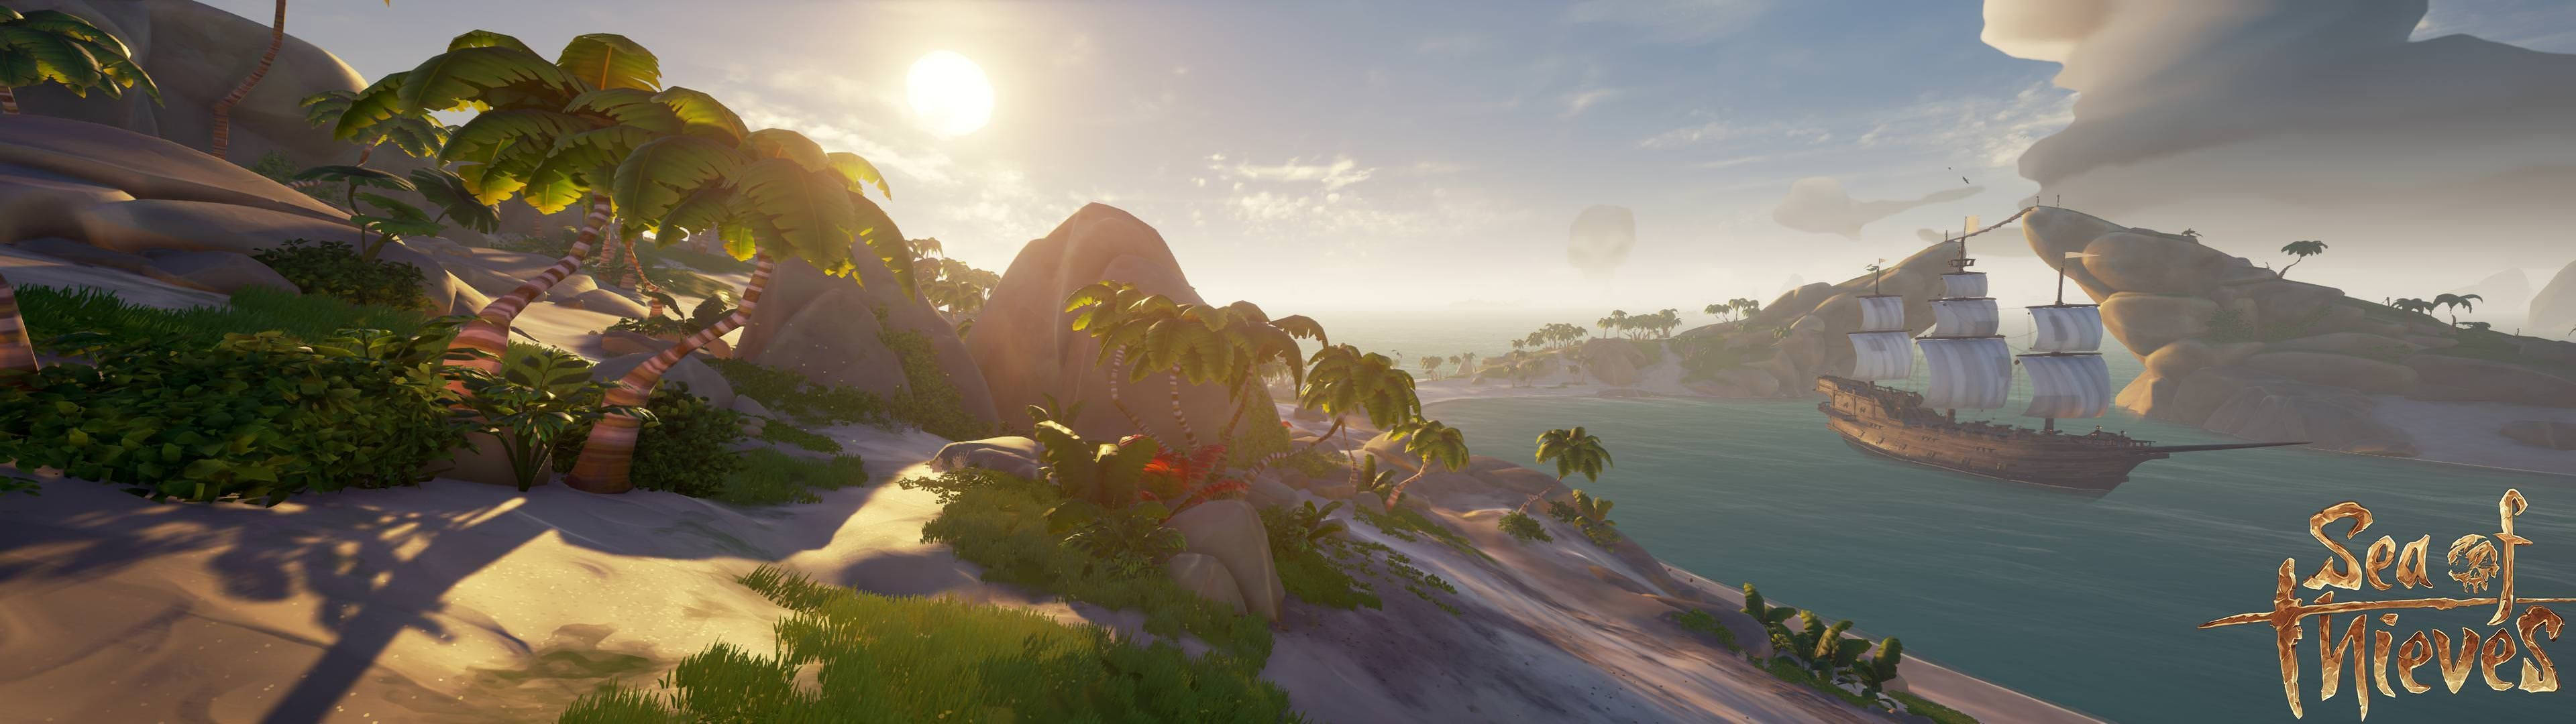 Sea Of Thieves 3840X1080 Wallpaper and Background Image